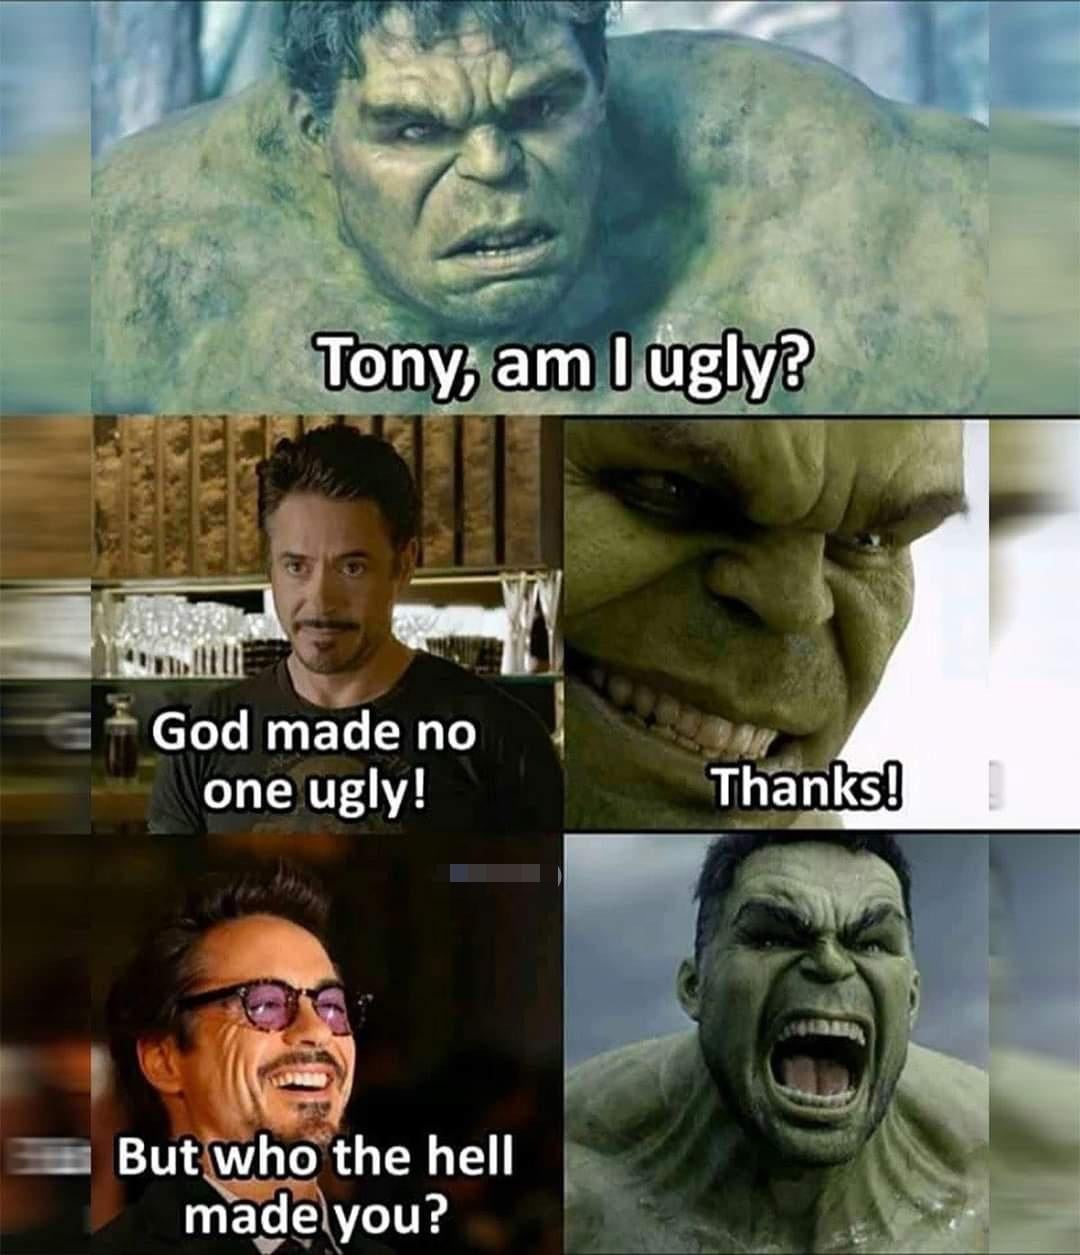 serbia gay meme - Tony, am I ugly? God made no one ugly! Thanks! But who the hell made you?